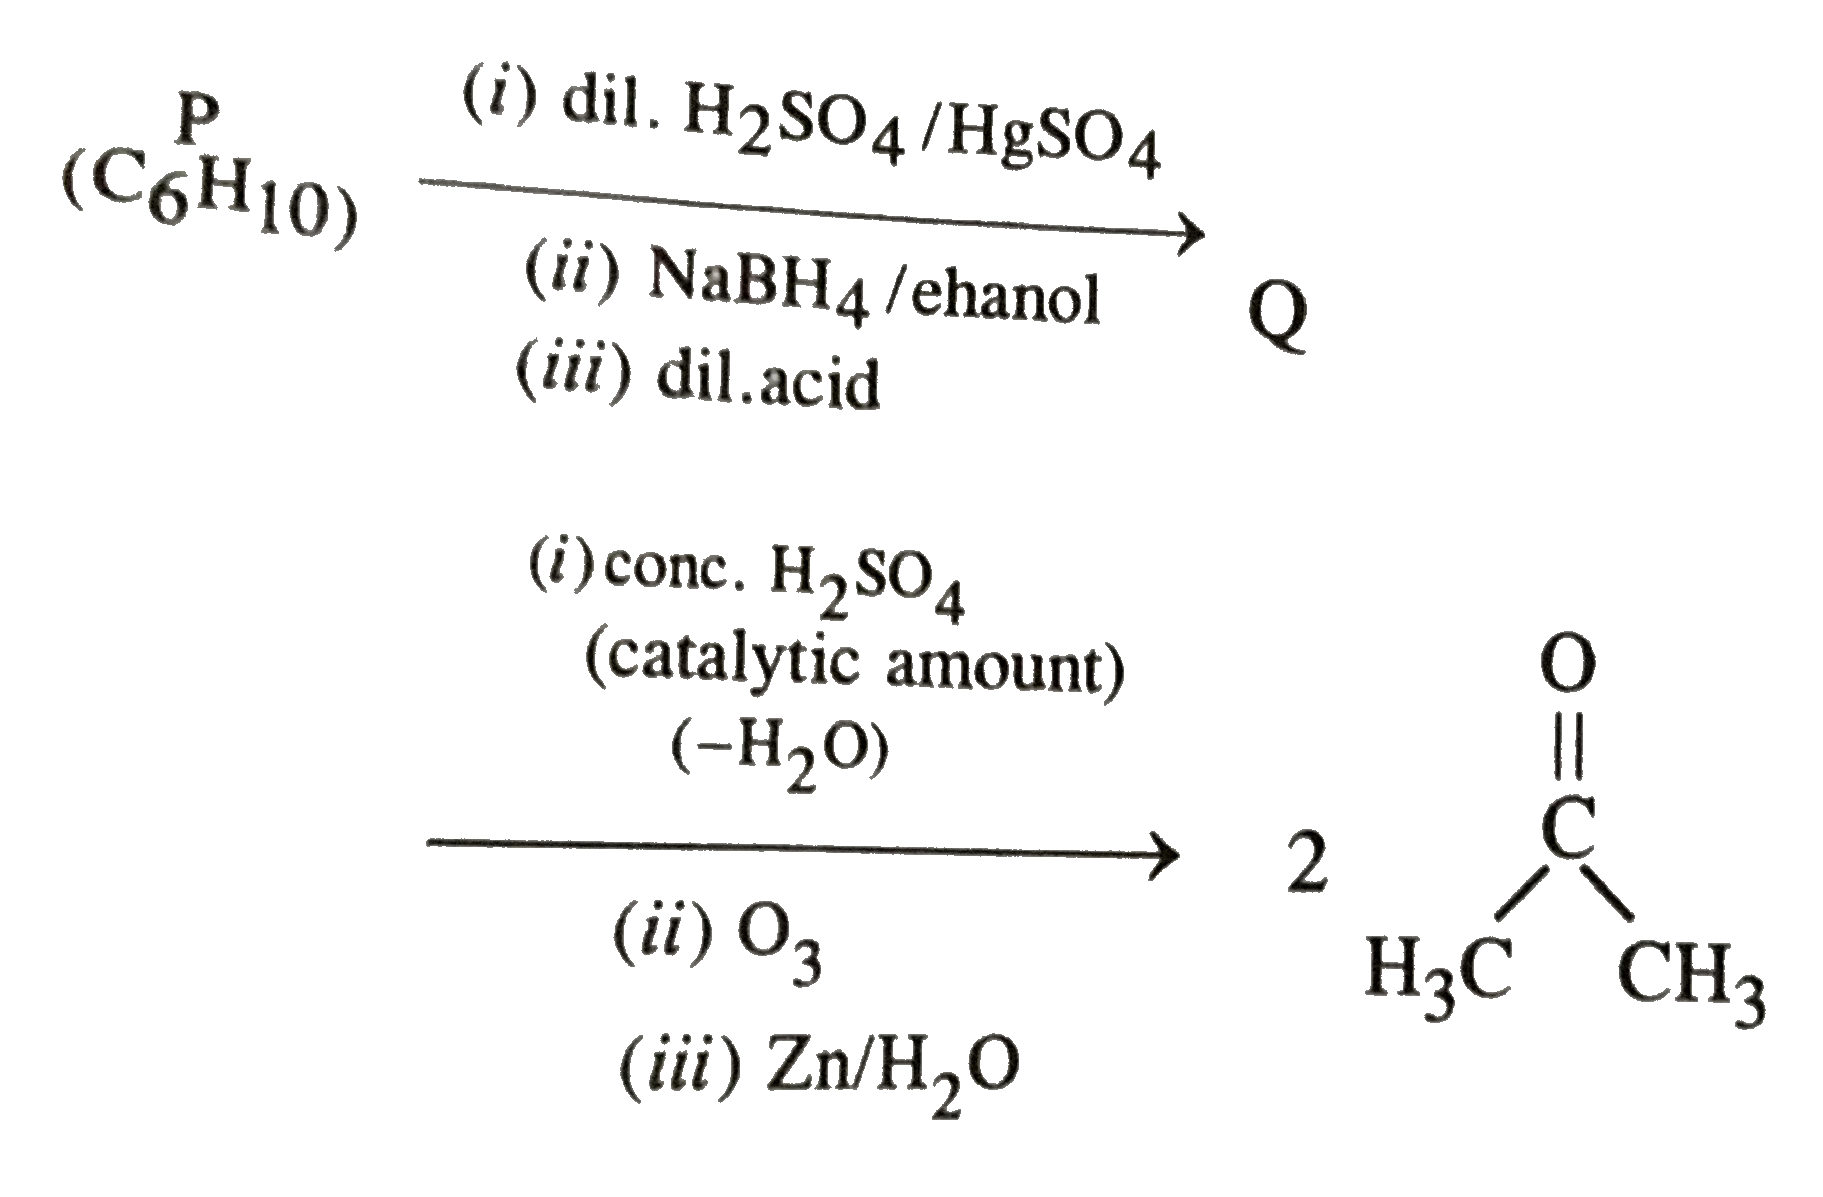 An acyclic hydrocarbon P, having molecular fromula C(6)H(10) gave acetone as the only organic product through the followig sequence of reaction in which Q is an intermediate organicn compound       The structure of compound P is